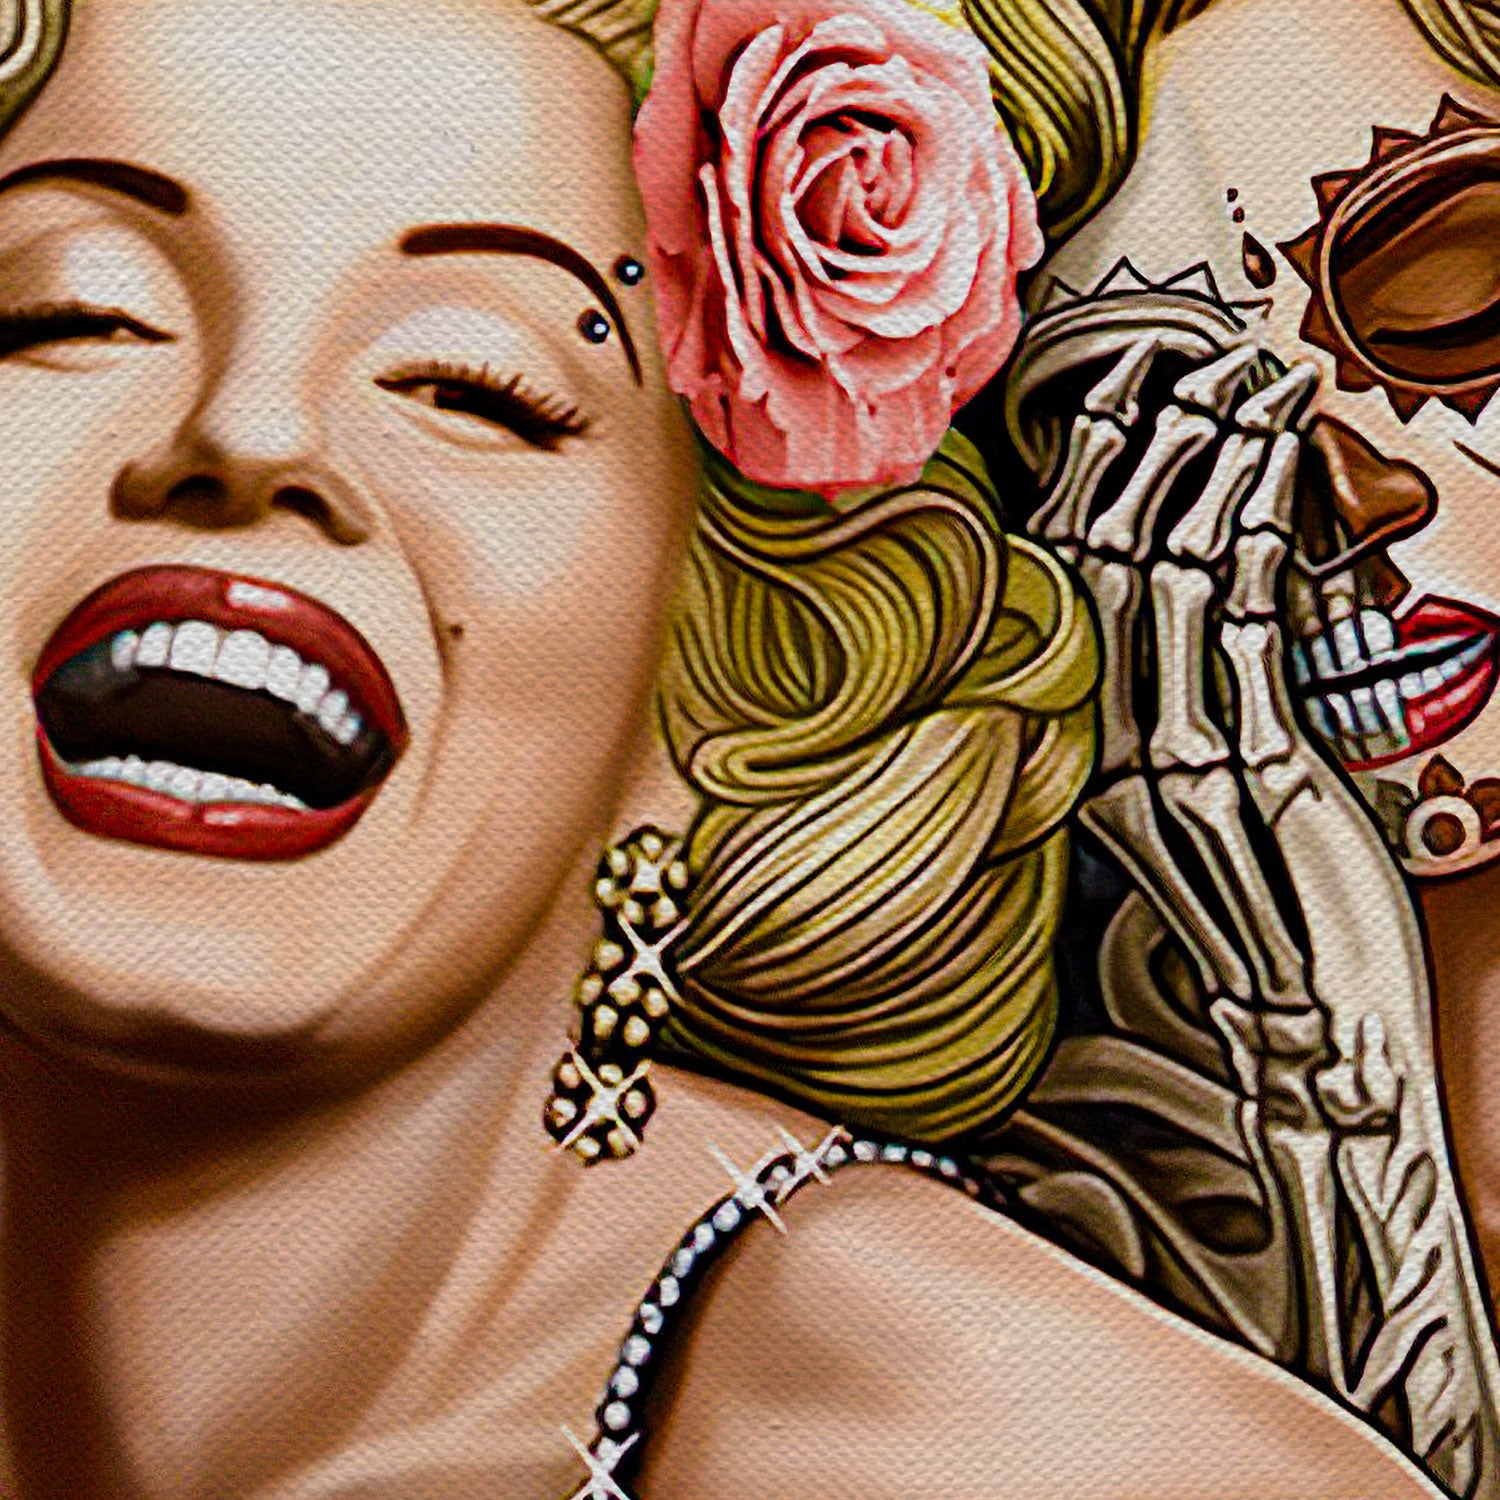 Marilyn Monroe Smile Now Cry Later Tattoo Wall Art Canvas